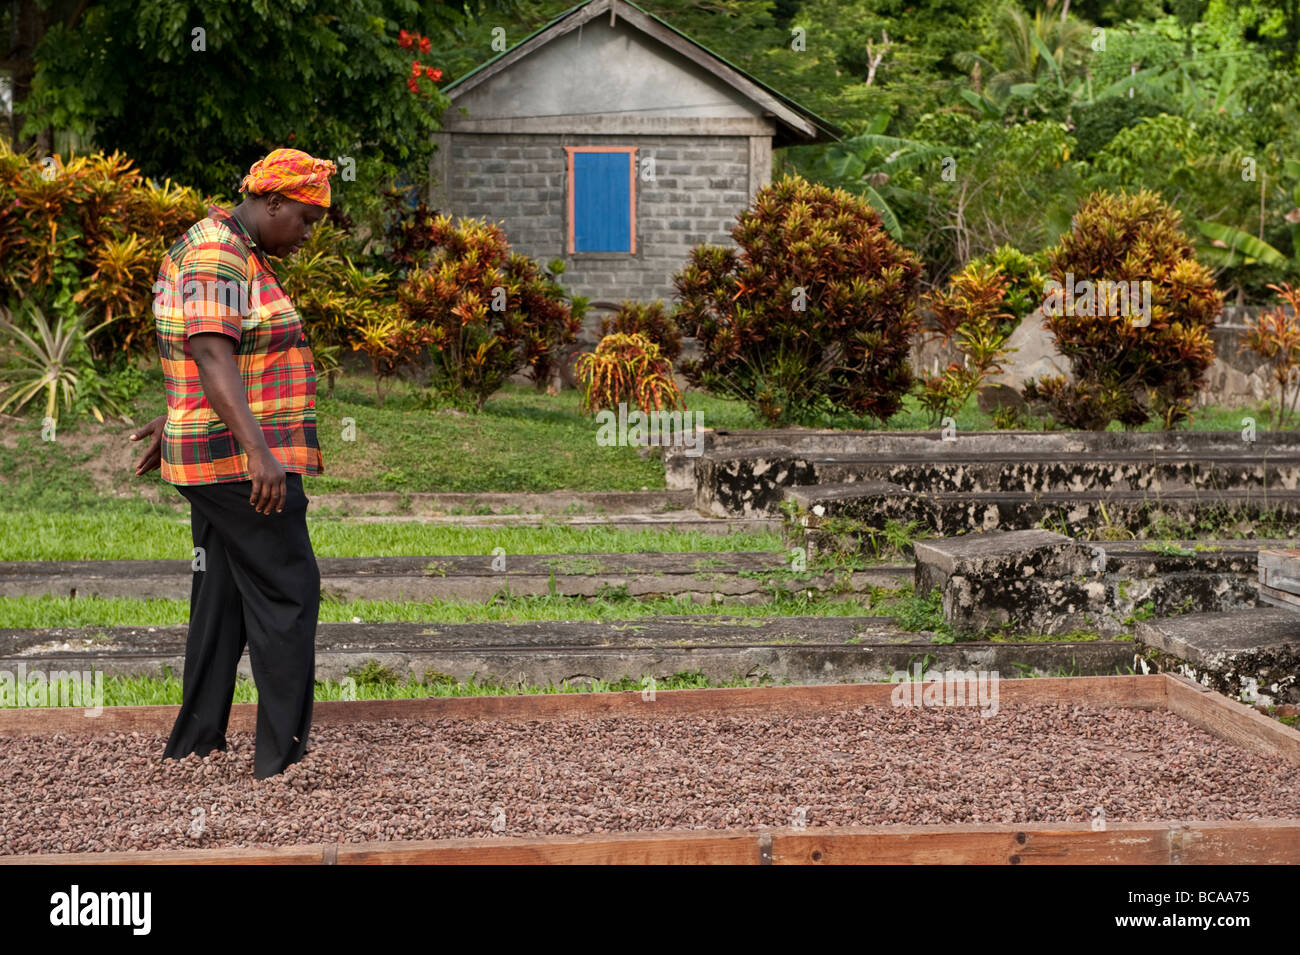 A local Grenadian woman in colourful dress 'walking the beans' the best way to turn cooa beans to dry evenly in the tropical sun Stock Photo